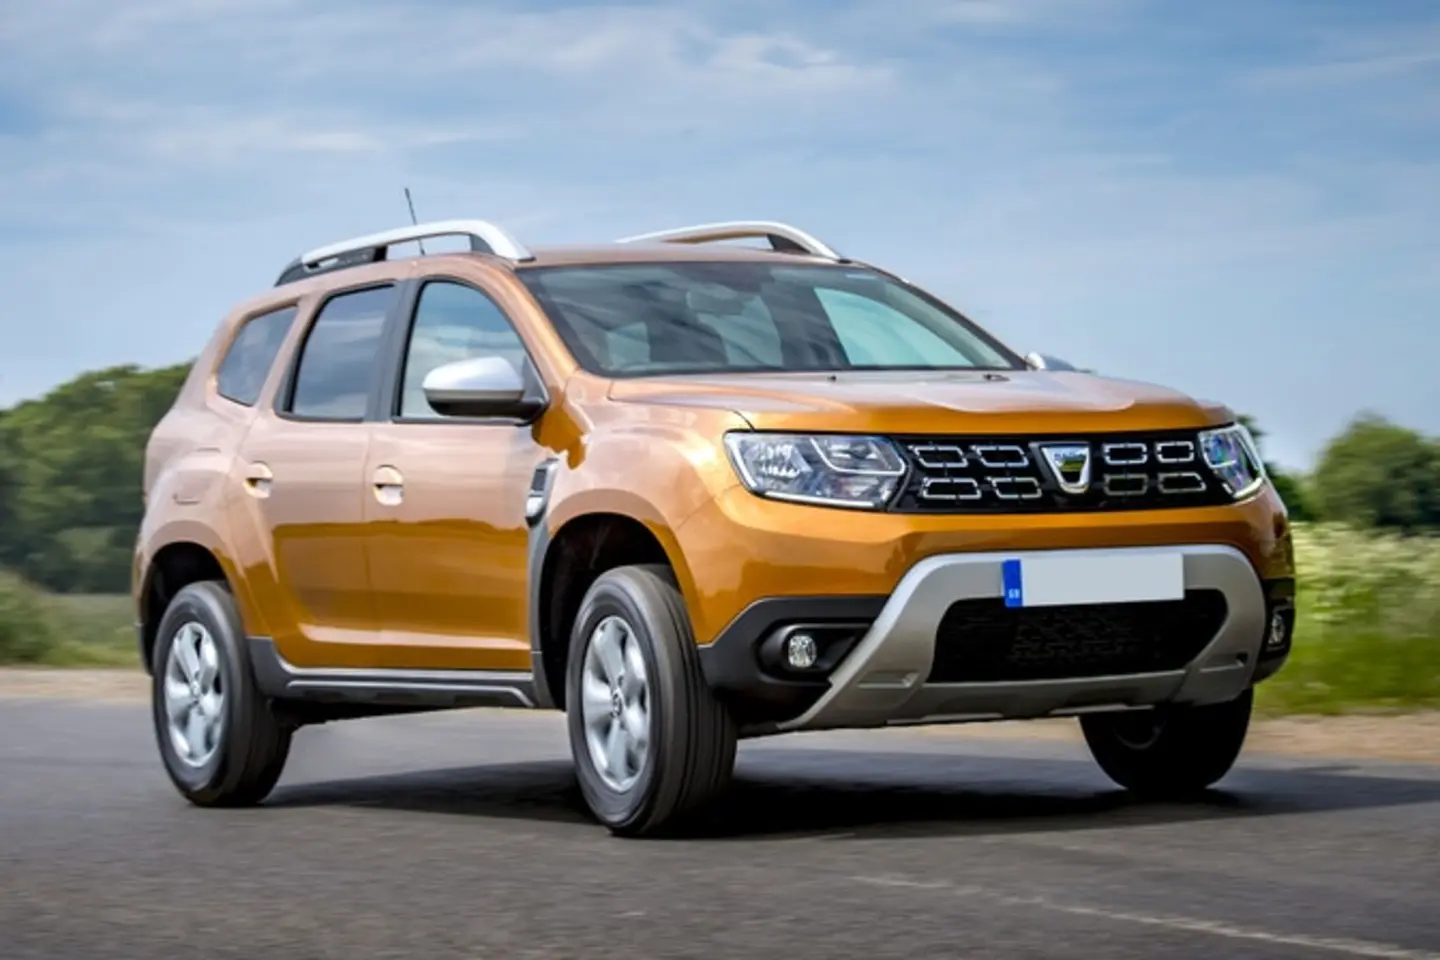 The front exterior of a gold Dacia Duster